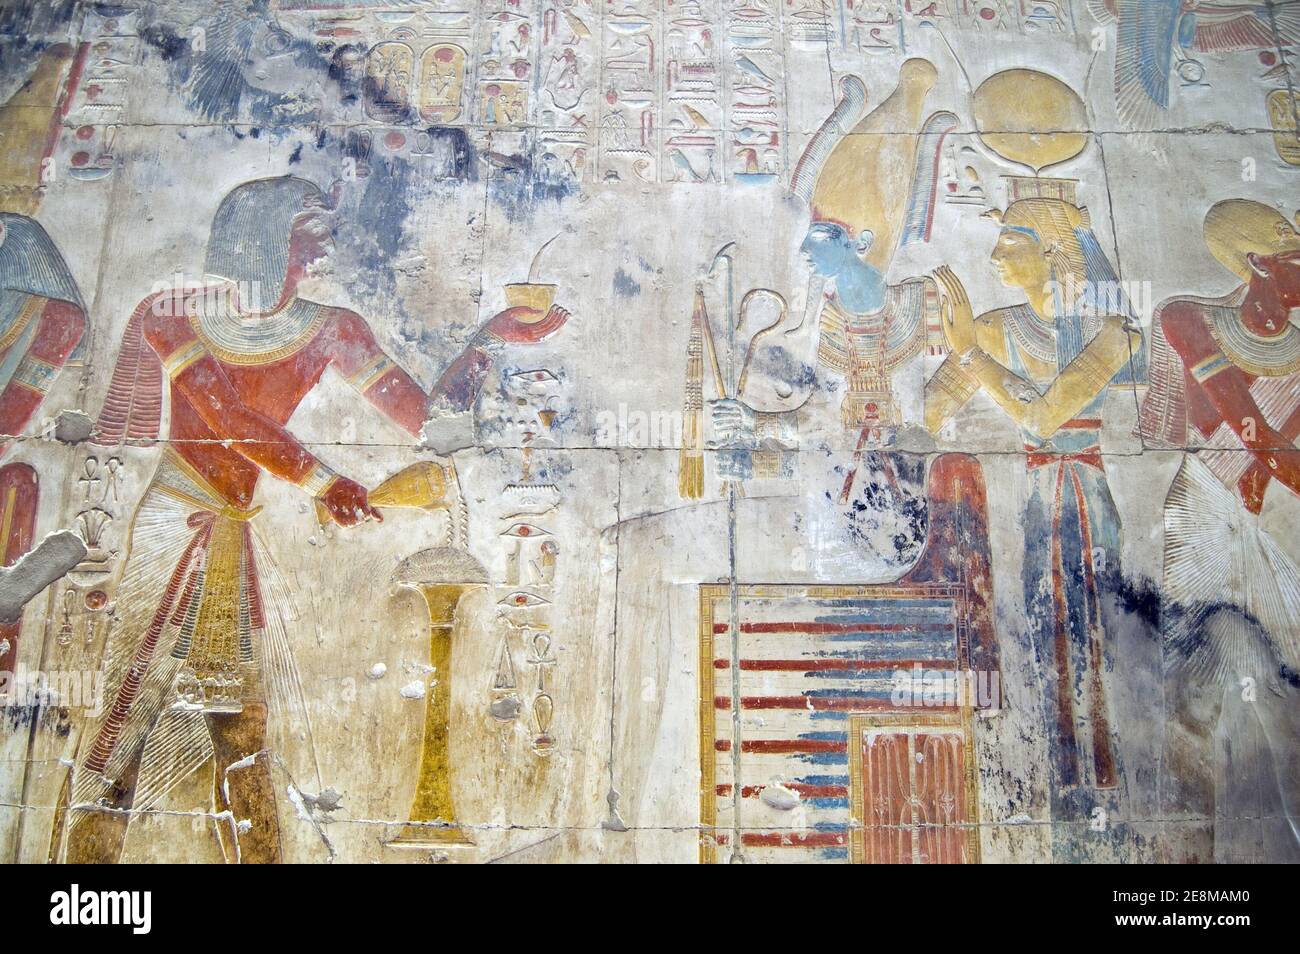 Ancient Egyptian carving showing the Pharaoh Seti I making an offering to the god of the underworld Osiris with the goddess Isis.  Wall of the temple Stock Photo